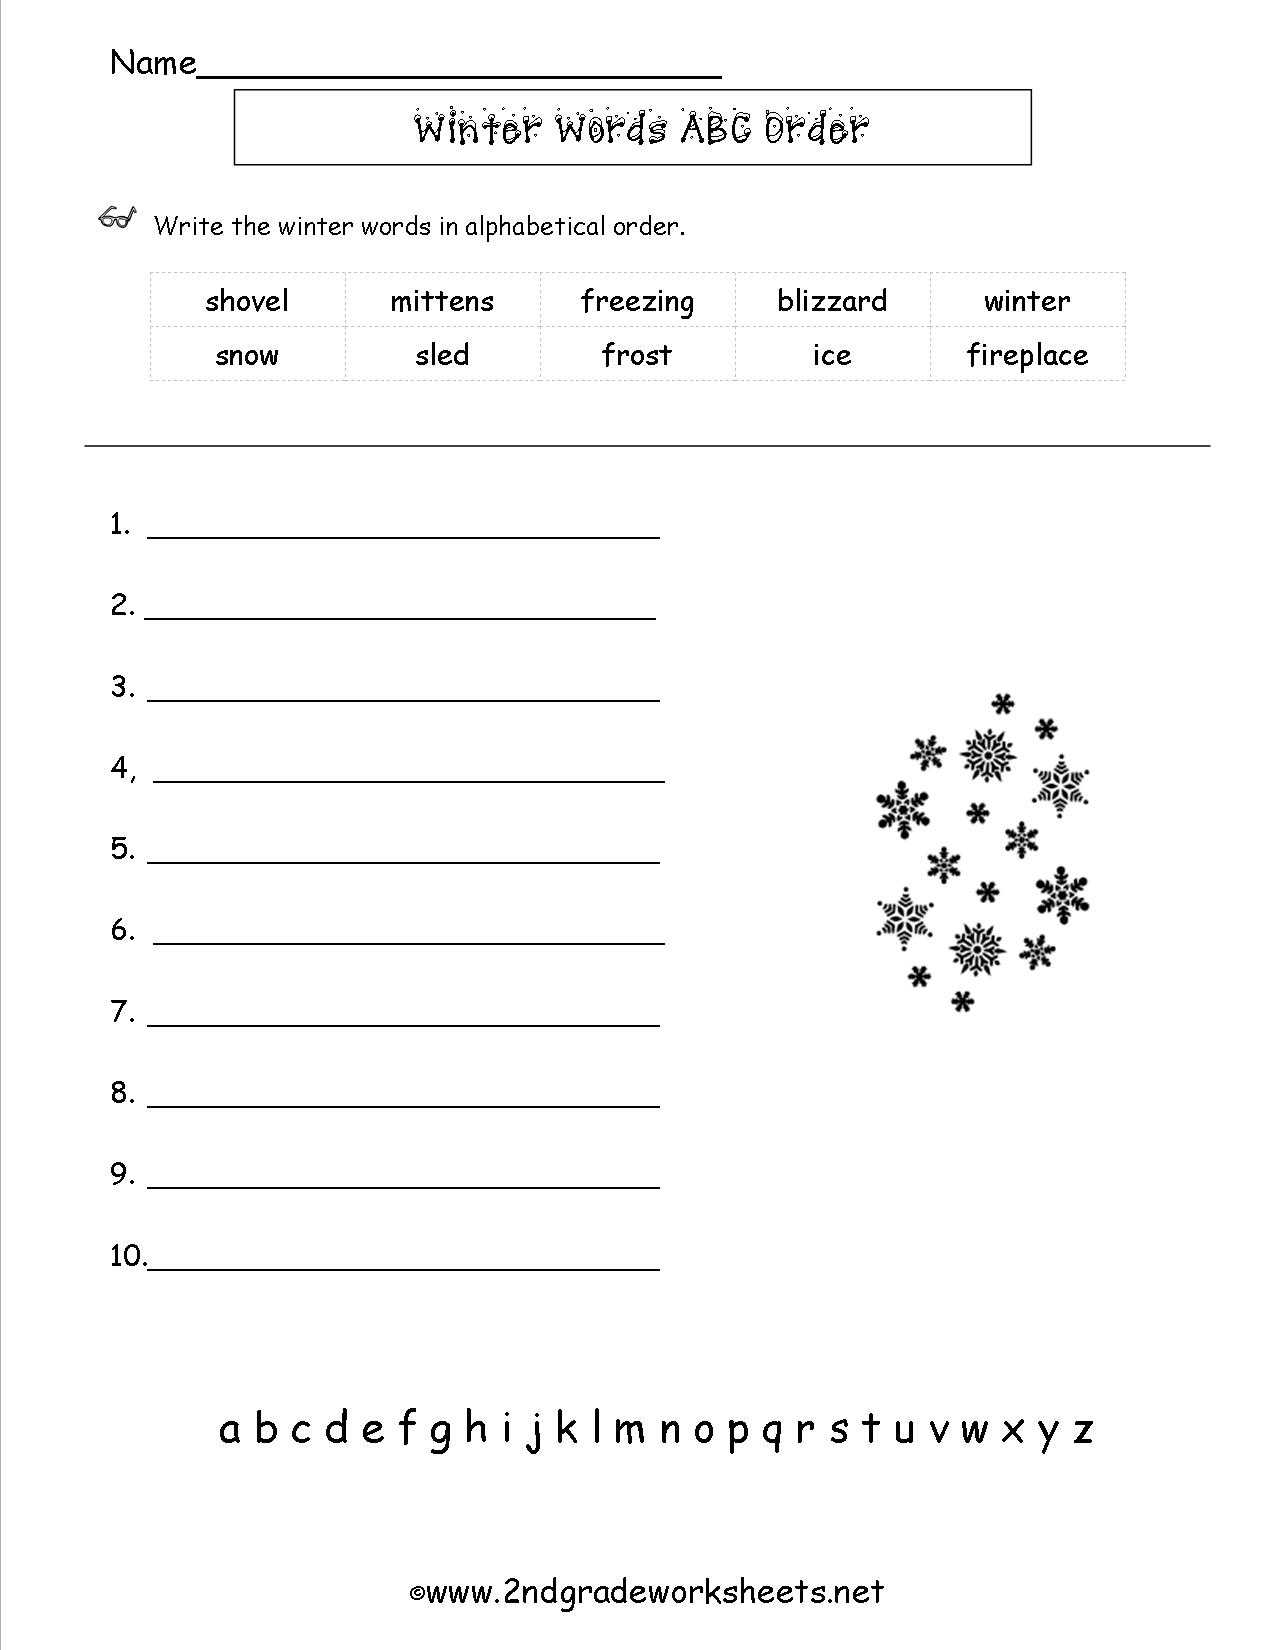 Weather and Climate Worksheets Pdf together with 4th Grade Science Lesson Plans Weather